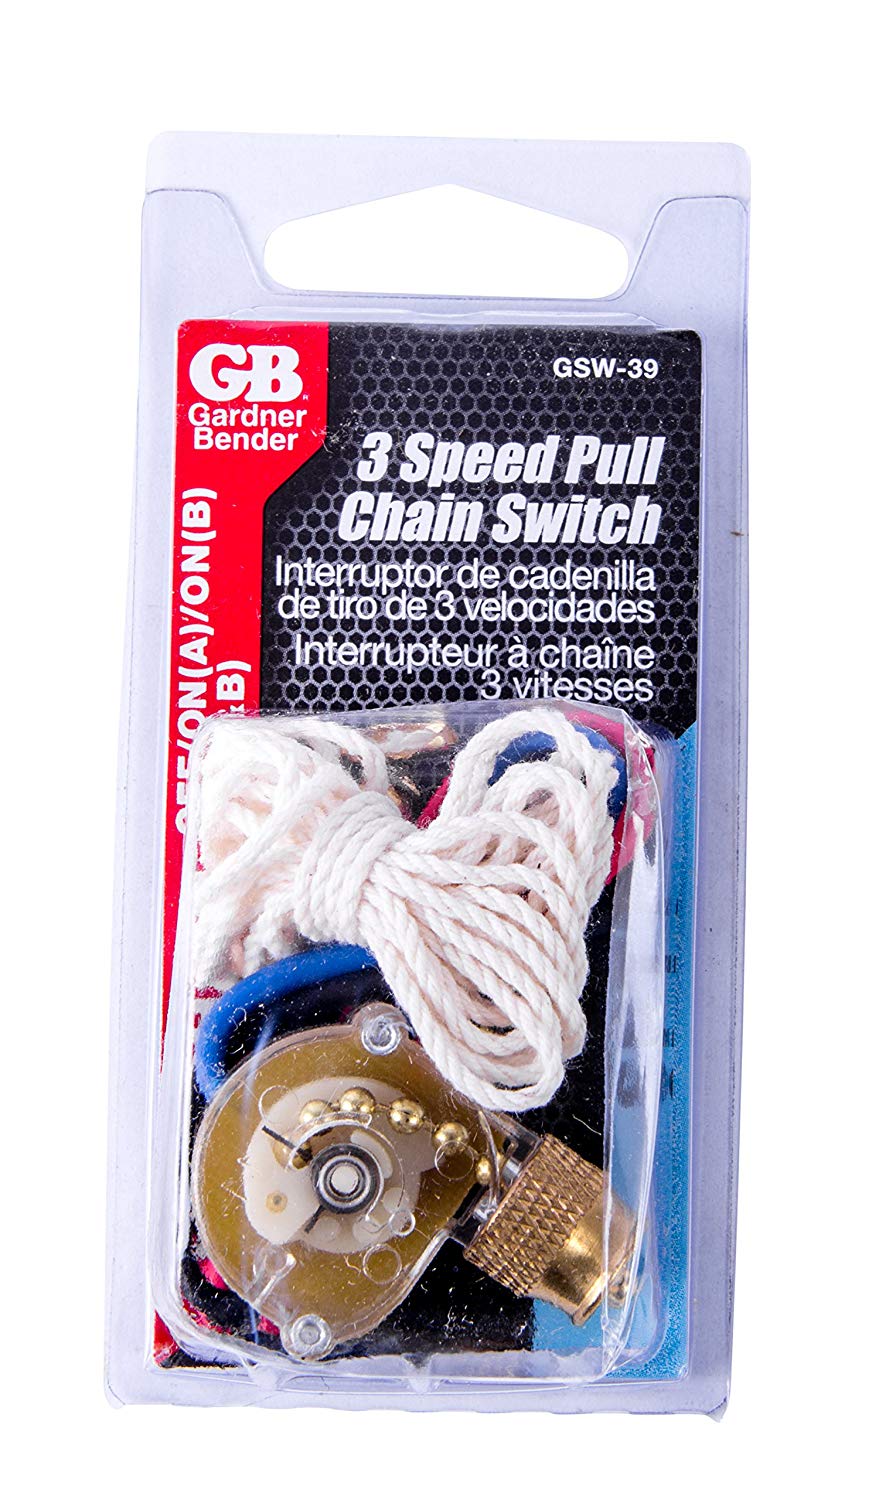 GB Electrical GSW-39 Variable Speed & Two Circuit Pull-Chain Switch, DP3T